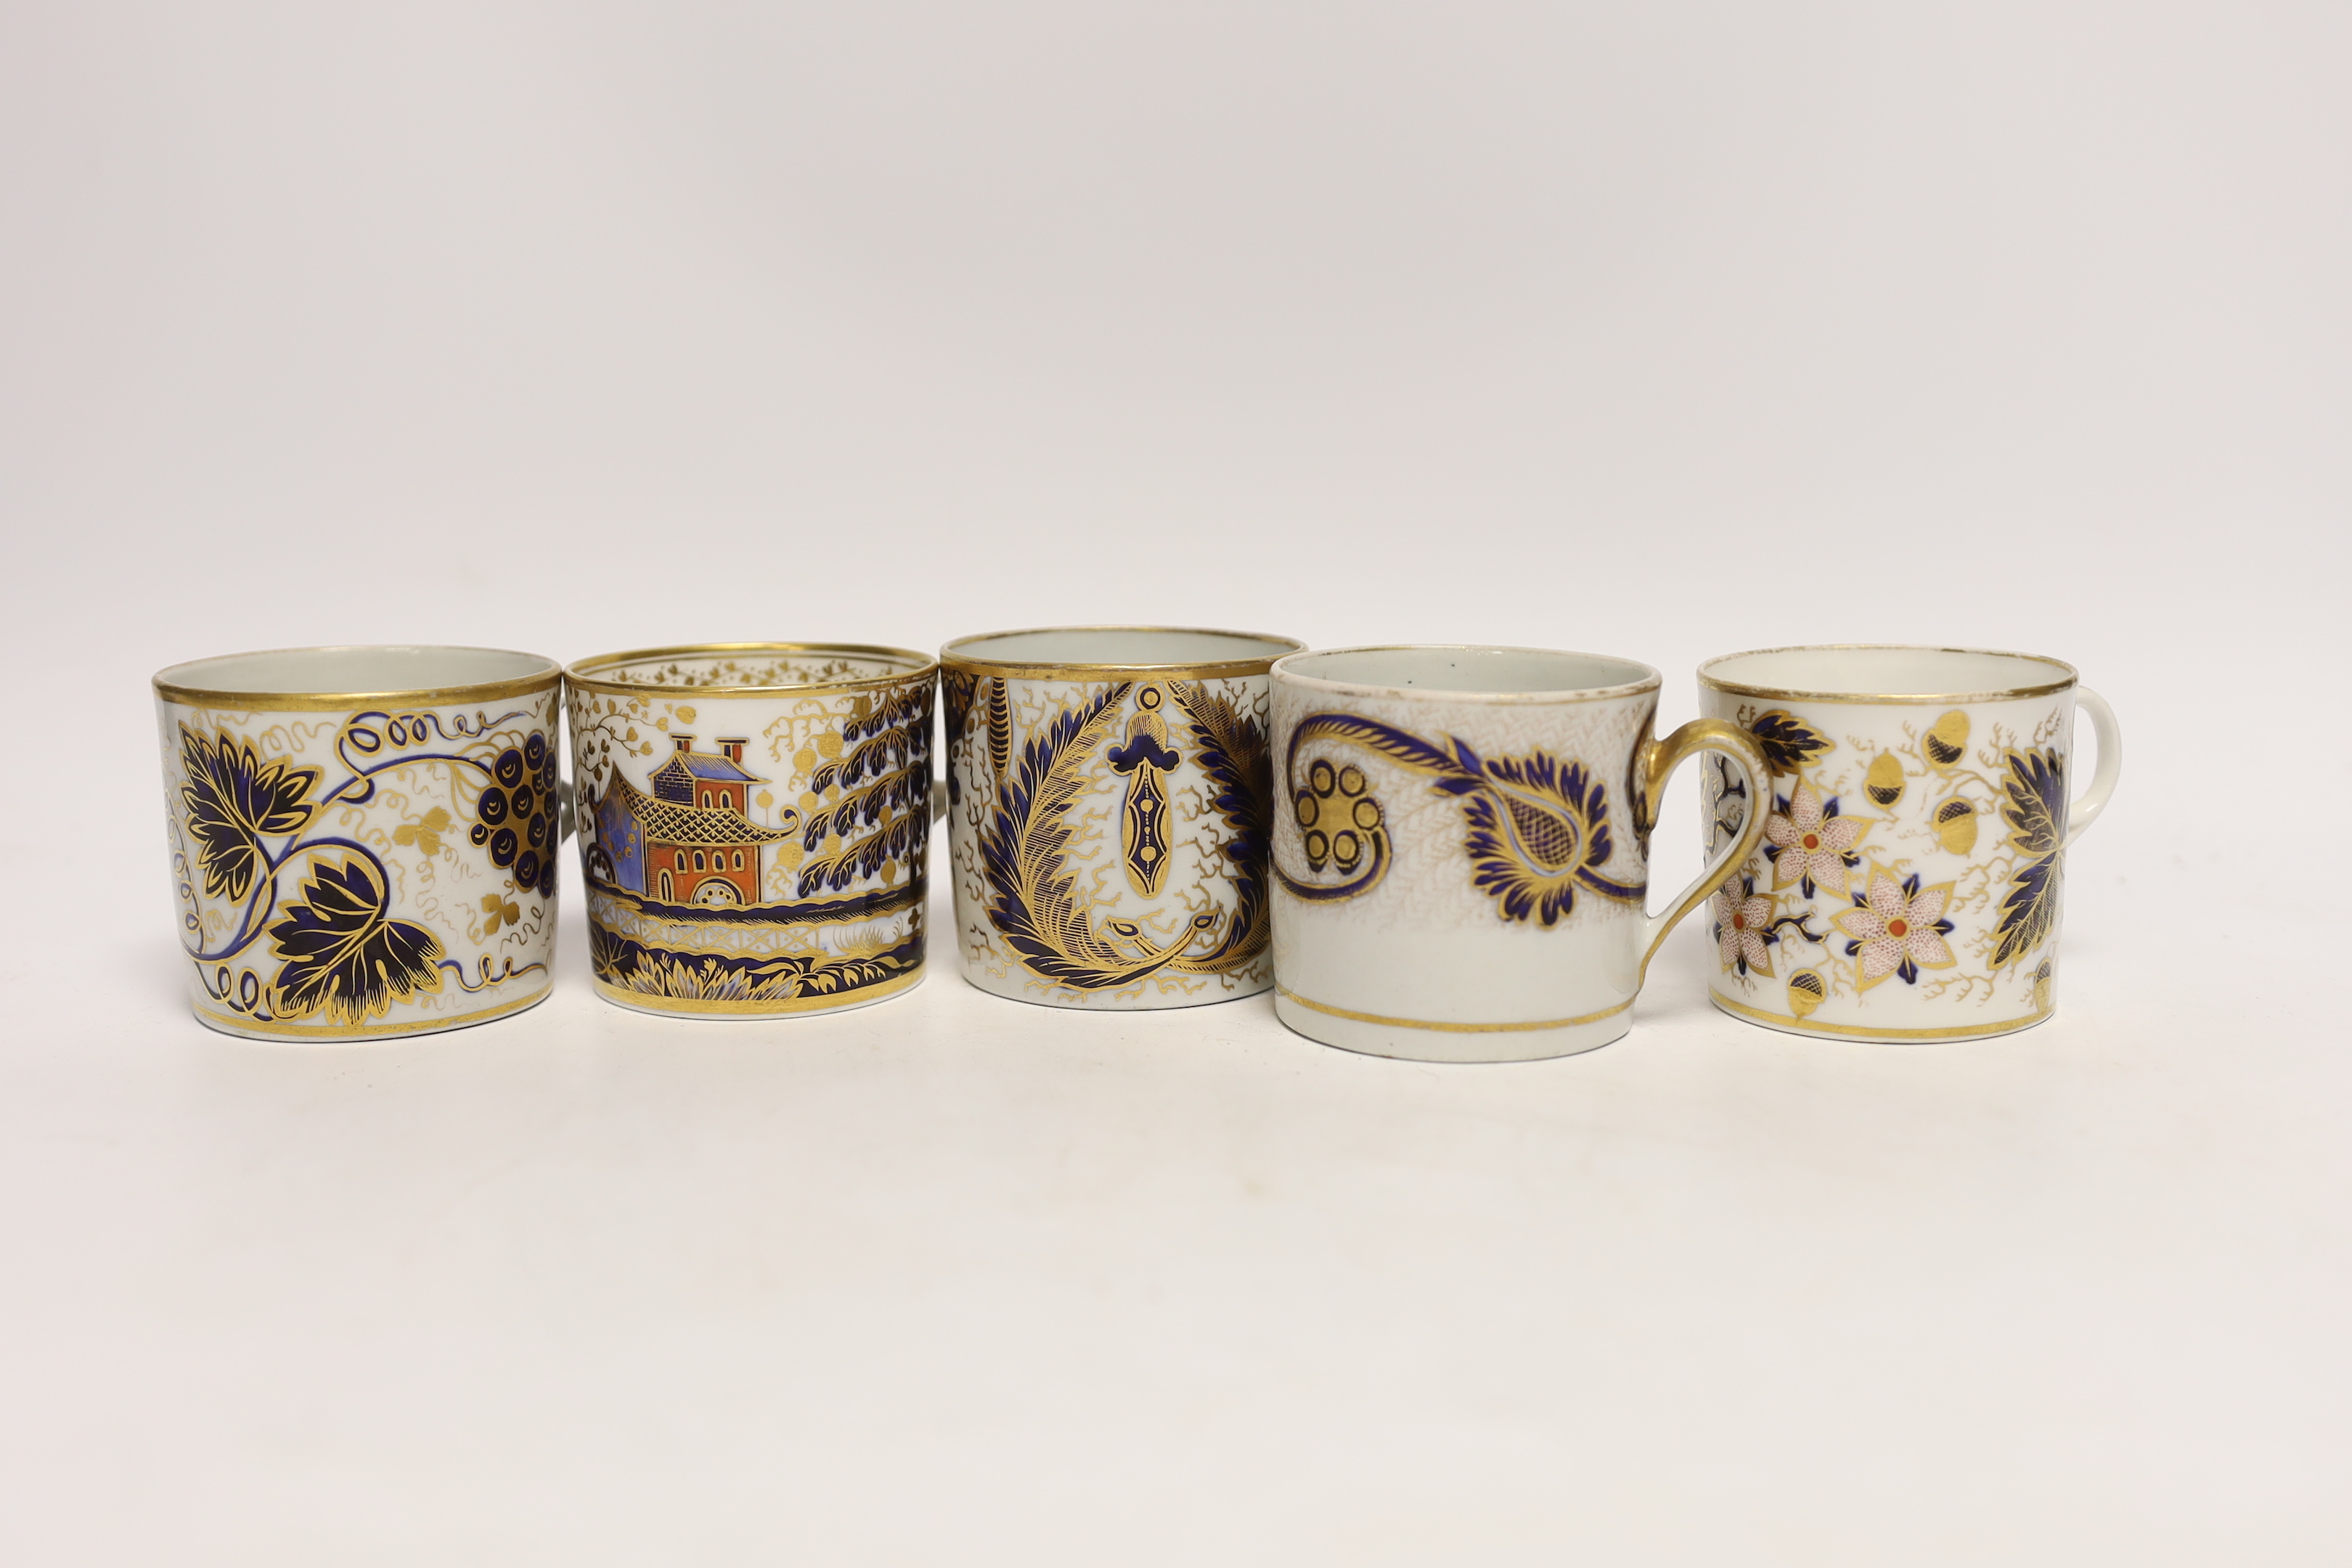 Twelve 1800-1820 English porcelain, mostly blue and gilt decorated coffee cans